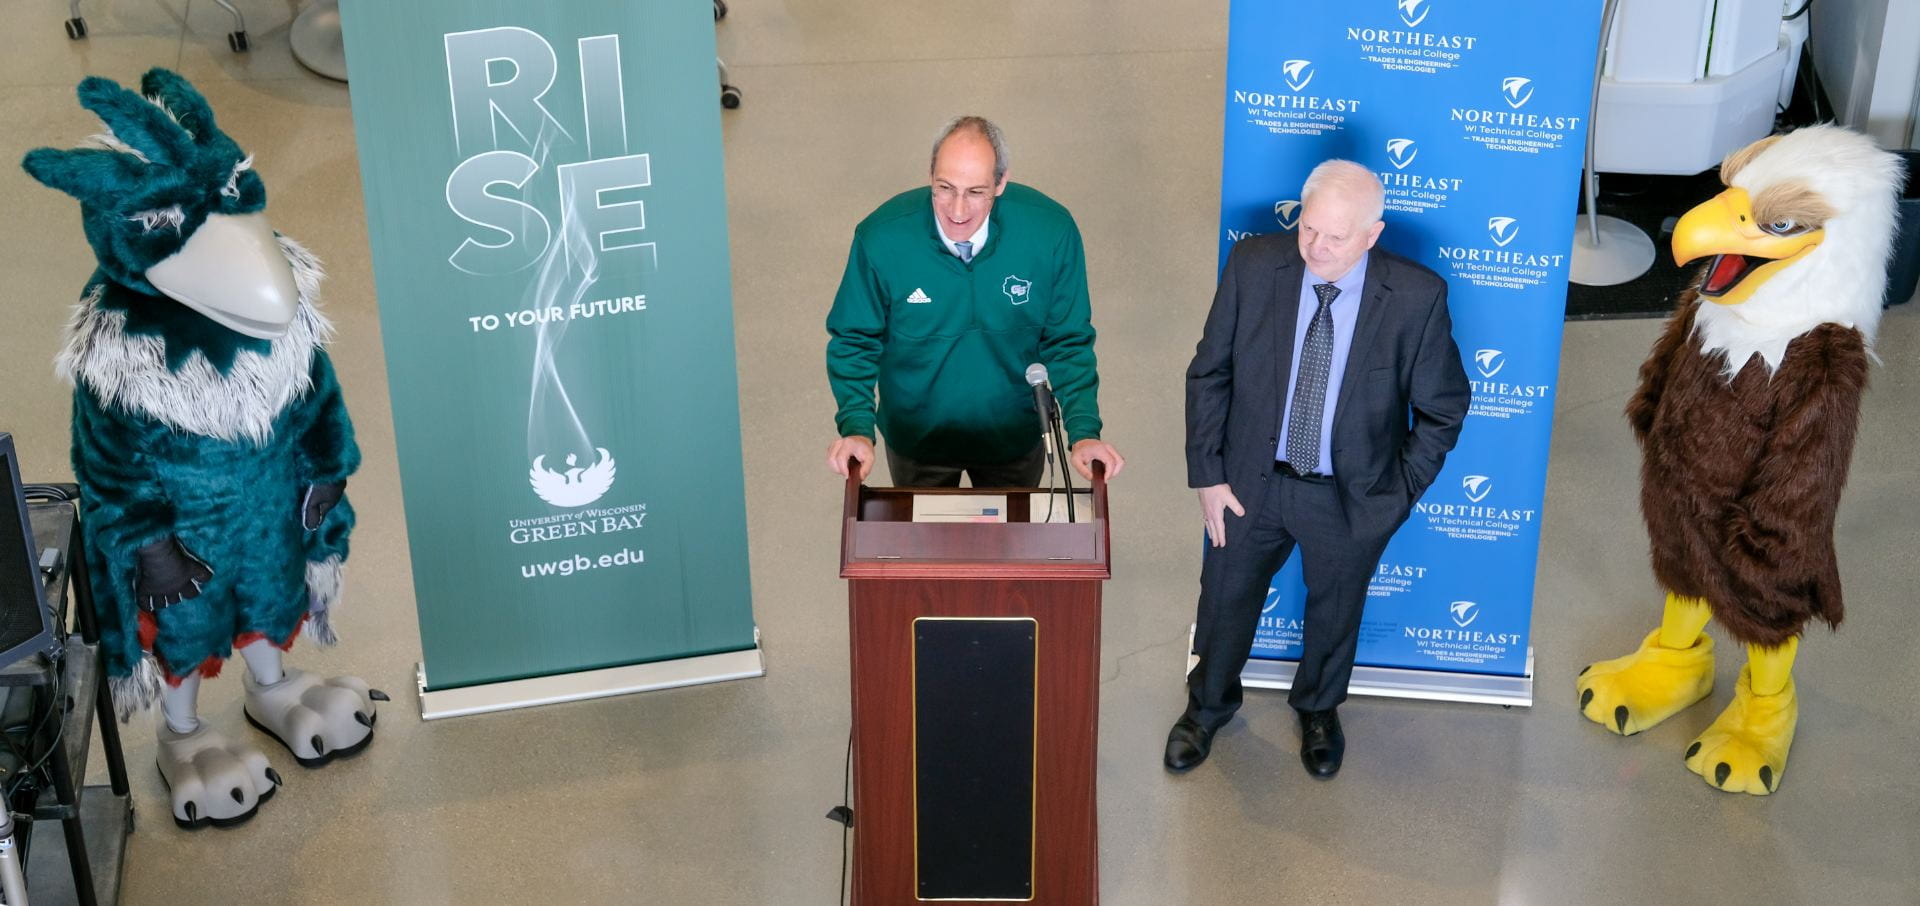 Northeast Wisconsin Technical College (NWTC) and UW-Green Bay will offer new transfer opportunities for learners to earn Associate of Arts and Associate of Arts and Science degrees. The two institutions of higher education partnered in an announcement at a press conference at the Brown County STEM Innovation Center.